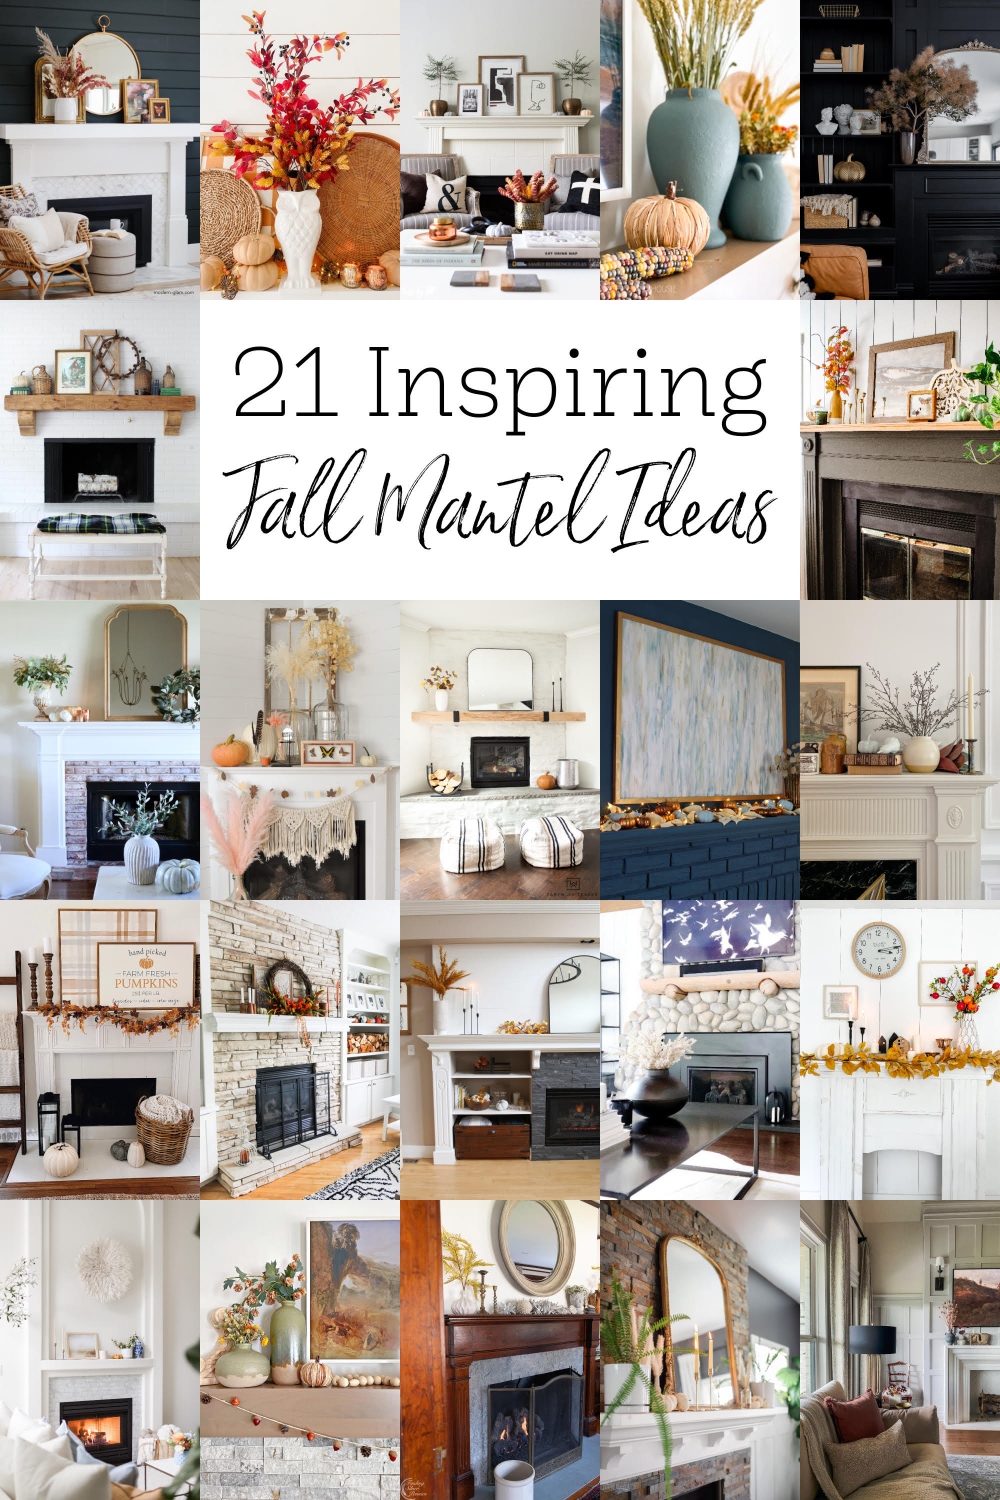 Boho Cottage Easy Fall Mantel Ideas. Create a earthy, textured mantel using items you already have! 